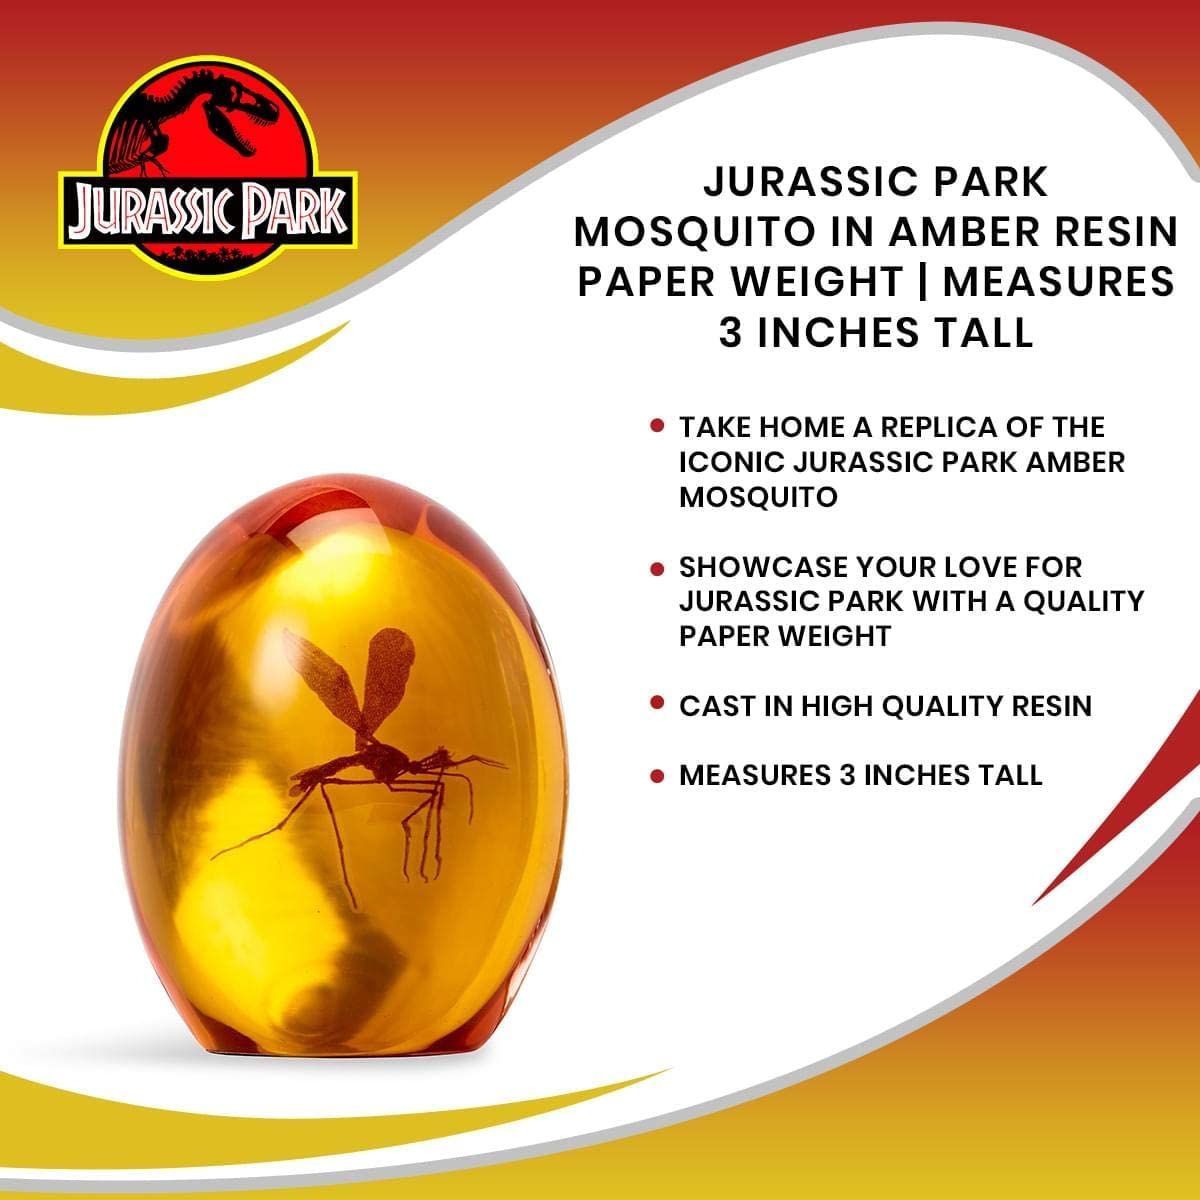 Information about the mosquito trapped in amber paperweight from Jurassic Park. There is text which says, 'Jurassic Park mosquito in amber resin paperweight. Measures 3 inches tall. Cast in high quality resin.'